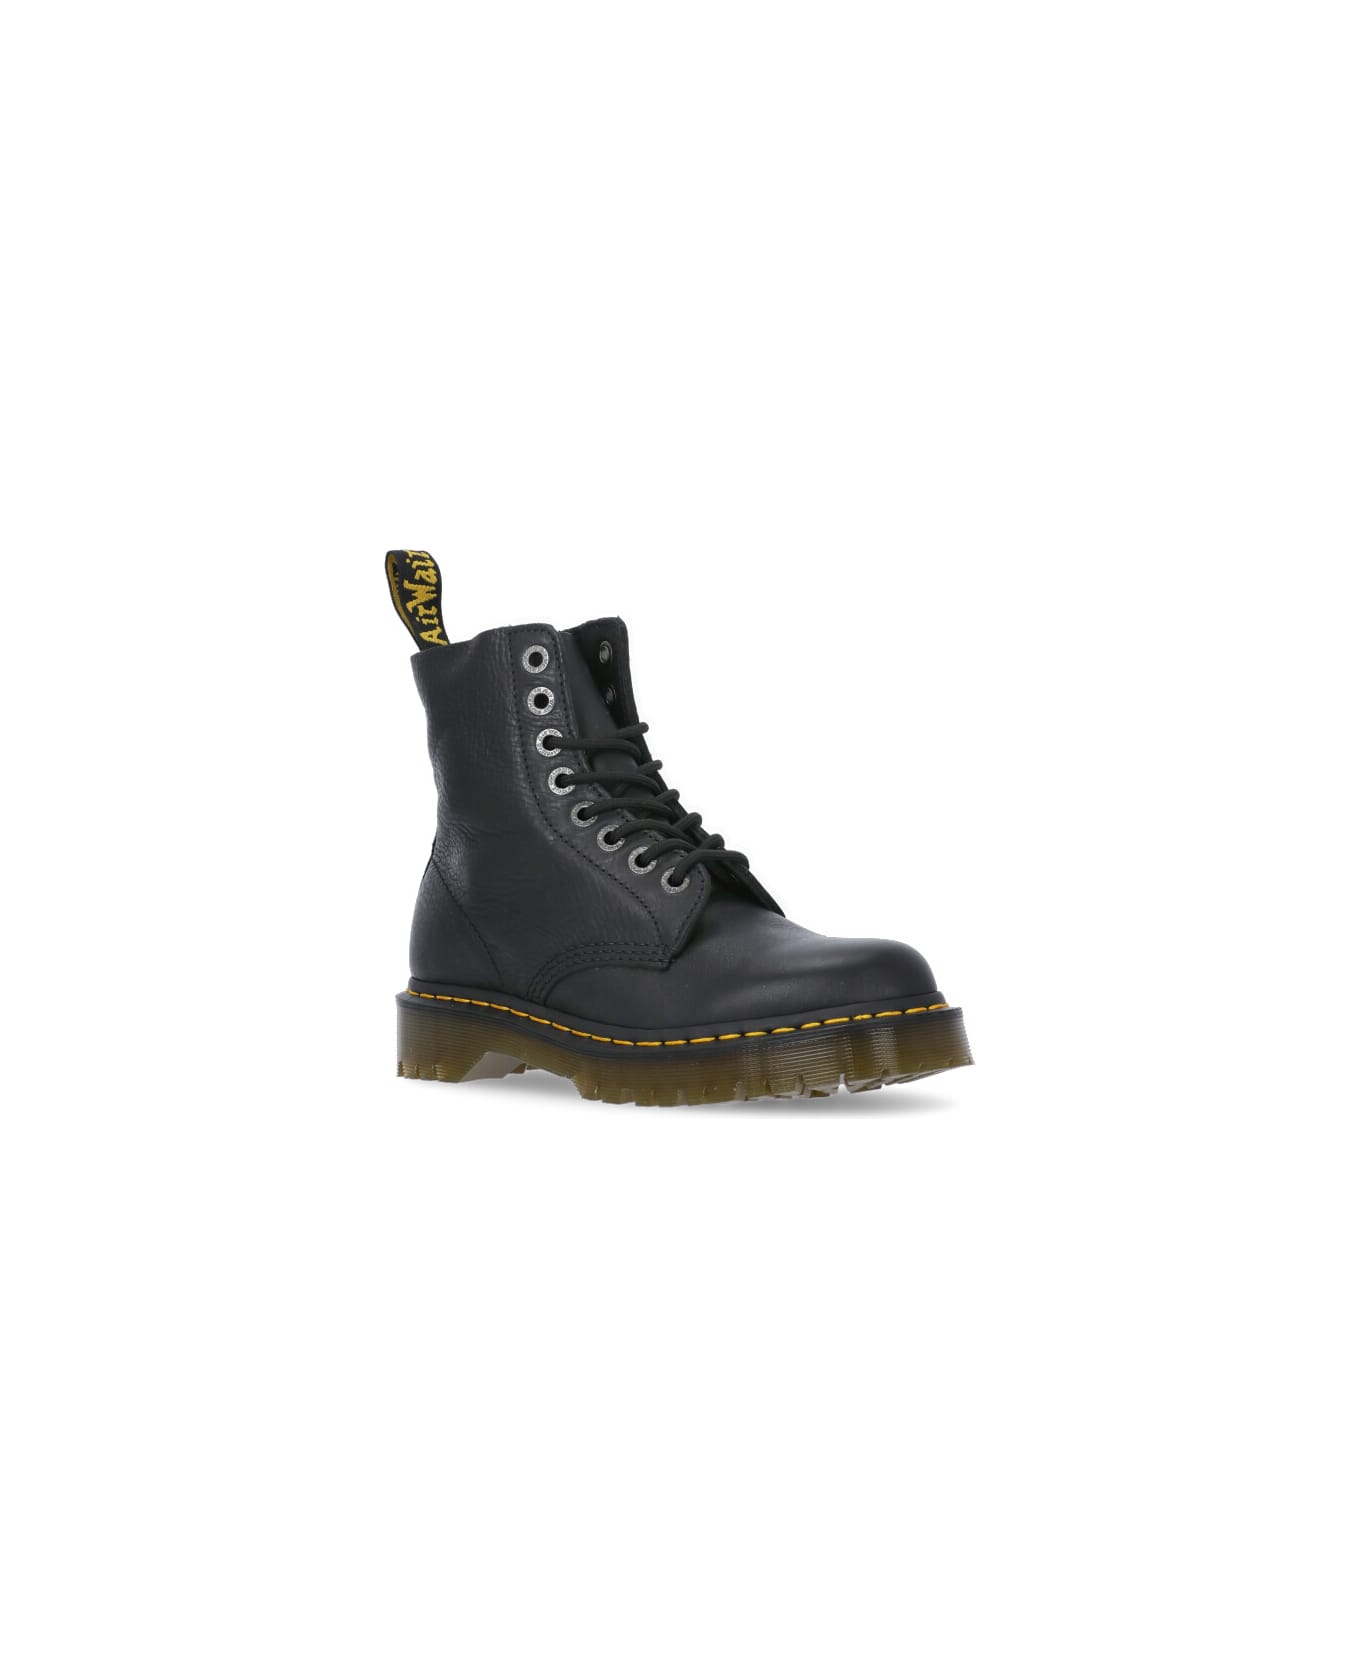 Dr. Martens Pascal Bex 1460 Boots ブーツ